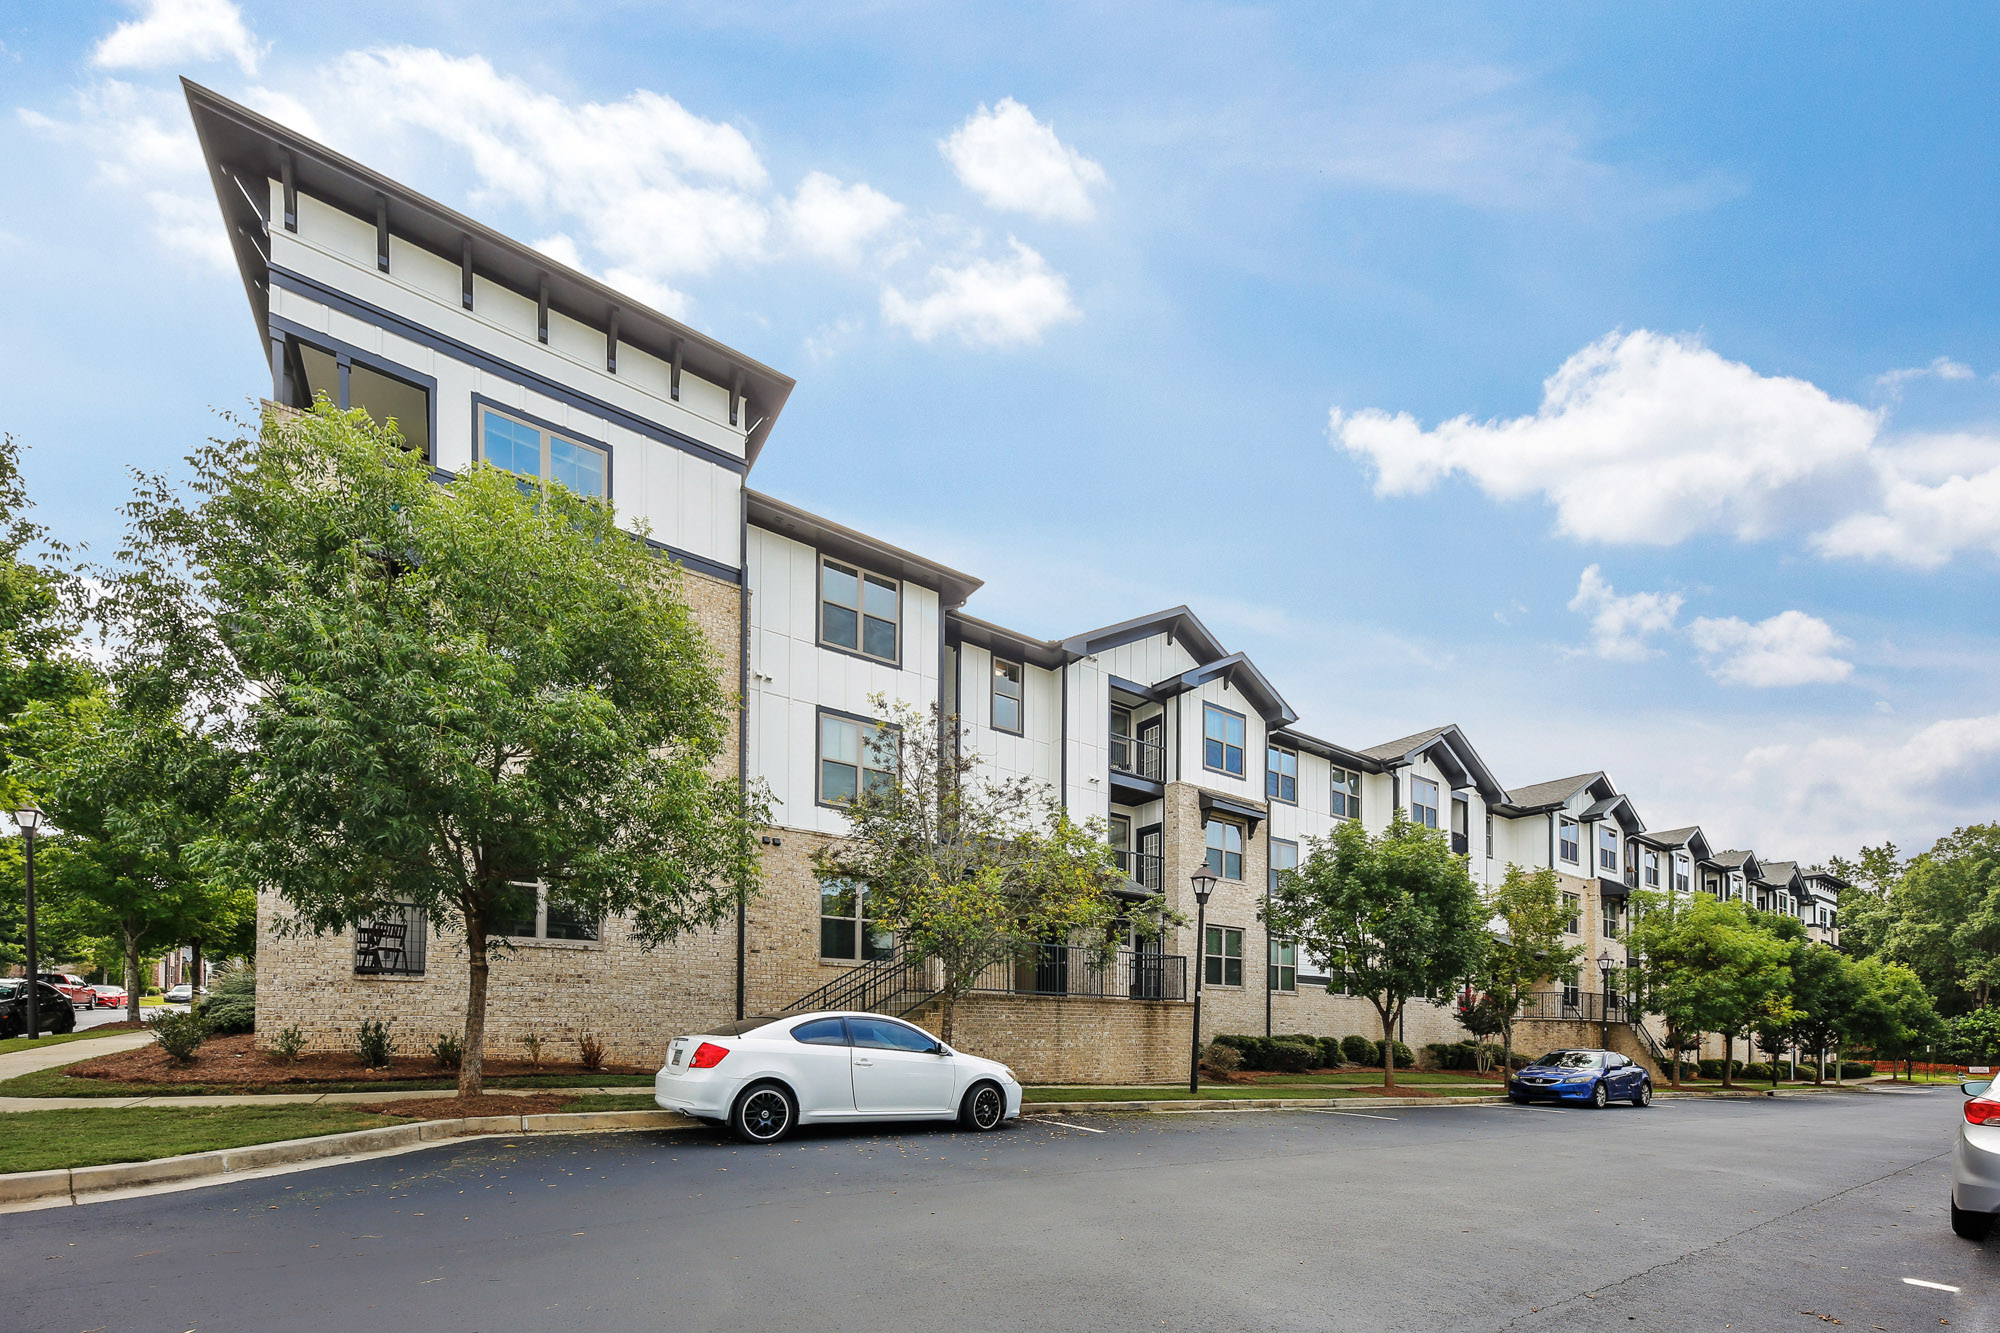 A larger three-story building at Park 9 apartments in Woodstock, GA.